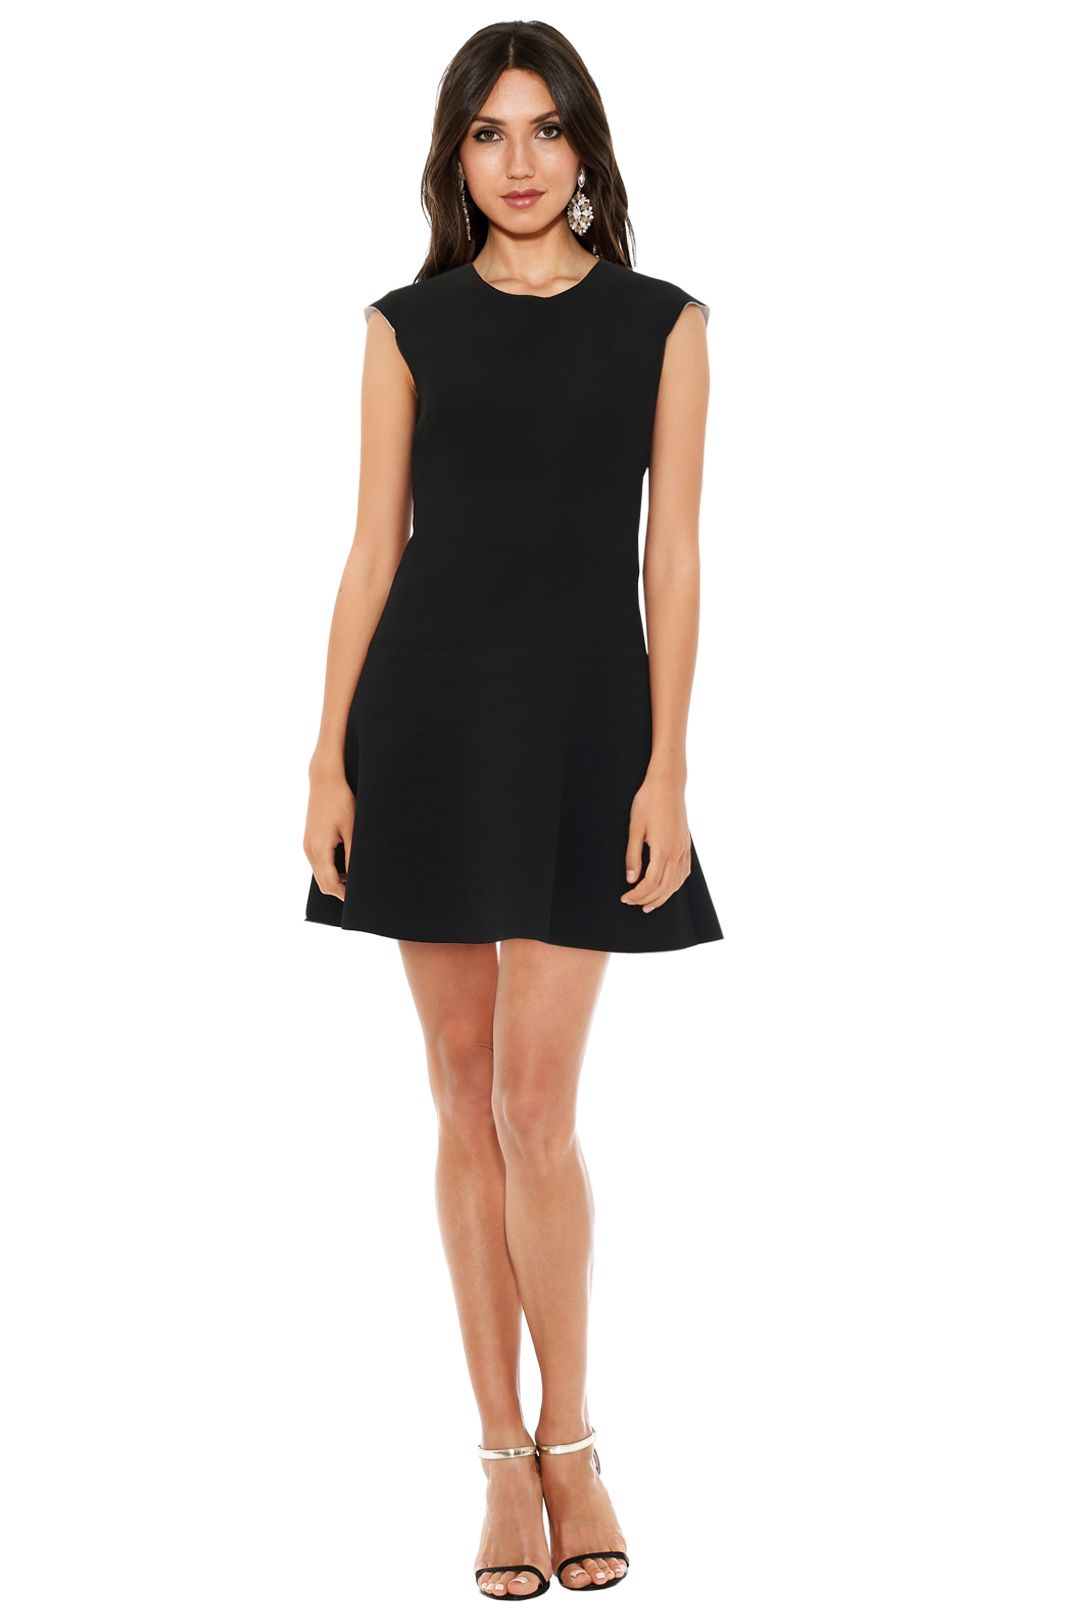 Remind Dress in Black by Sandro for Hire